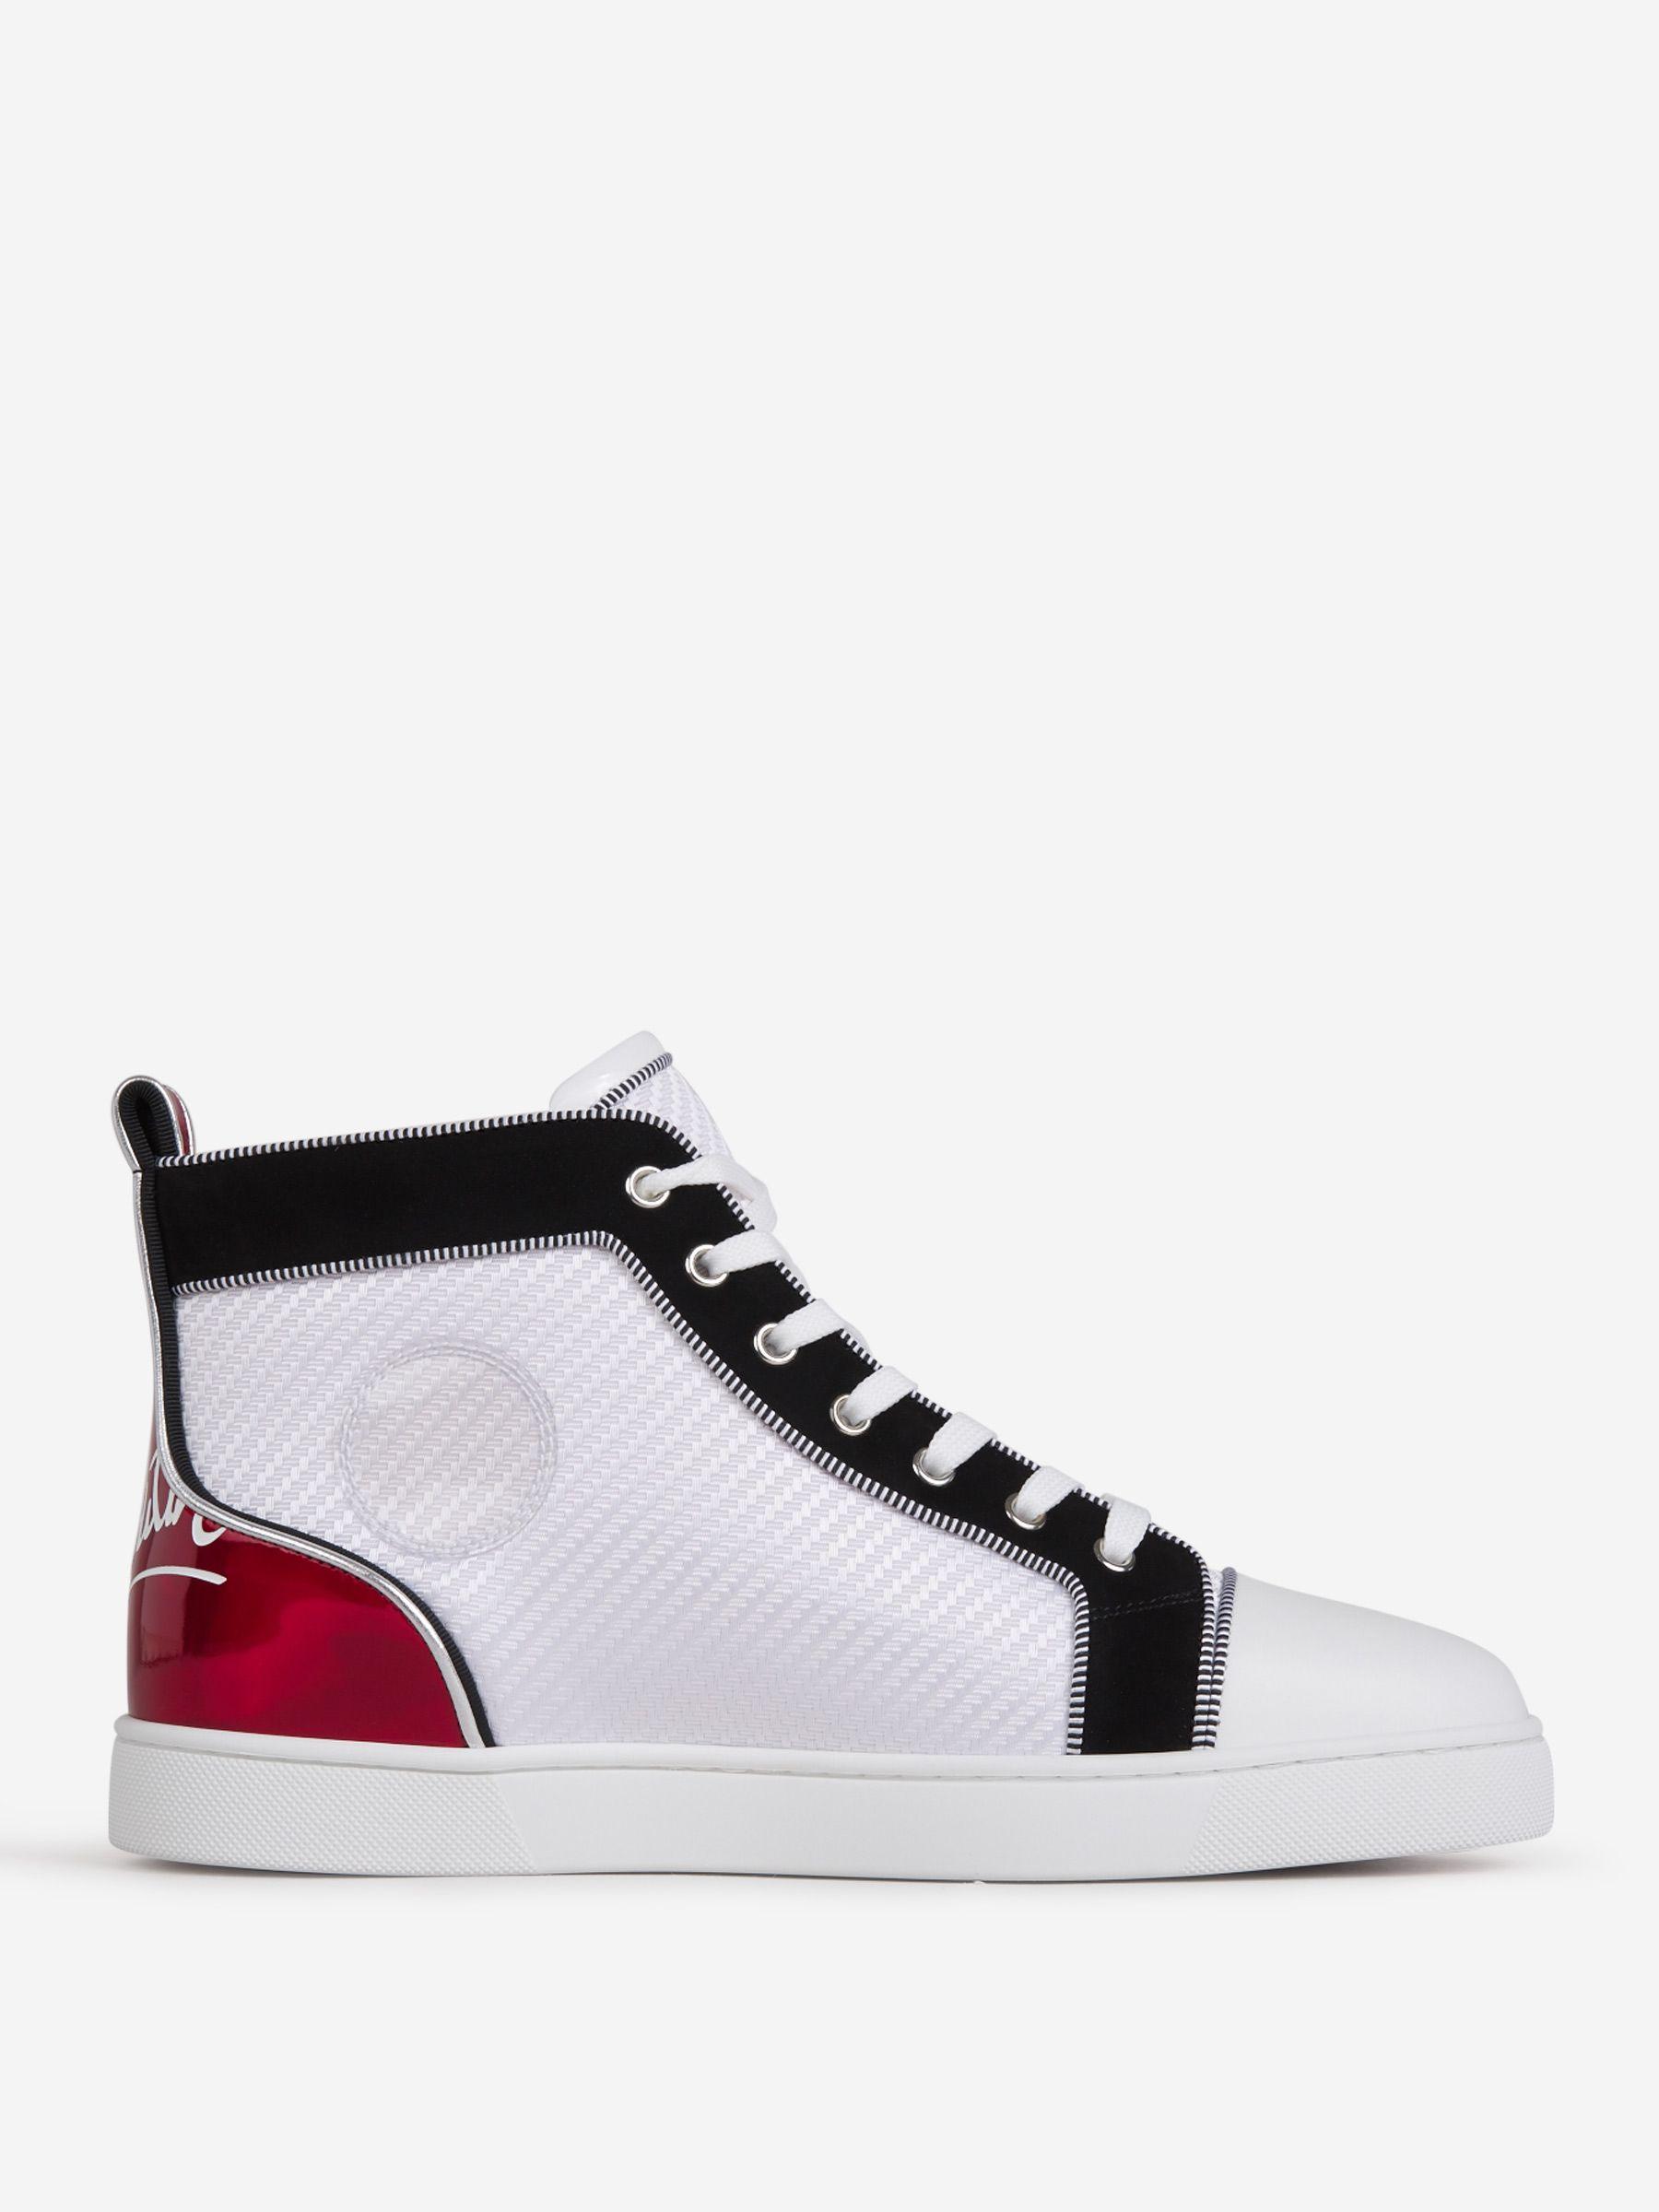 christian louboutin mens sneakers 100% Authentic New InBox 39.5 Red Black  White